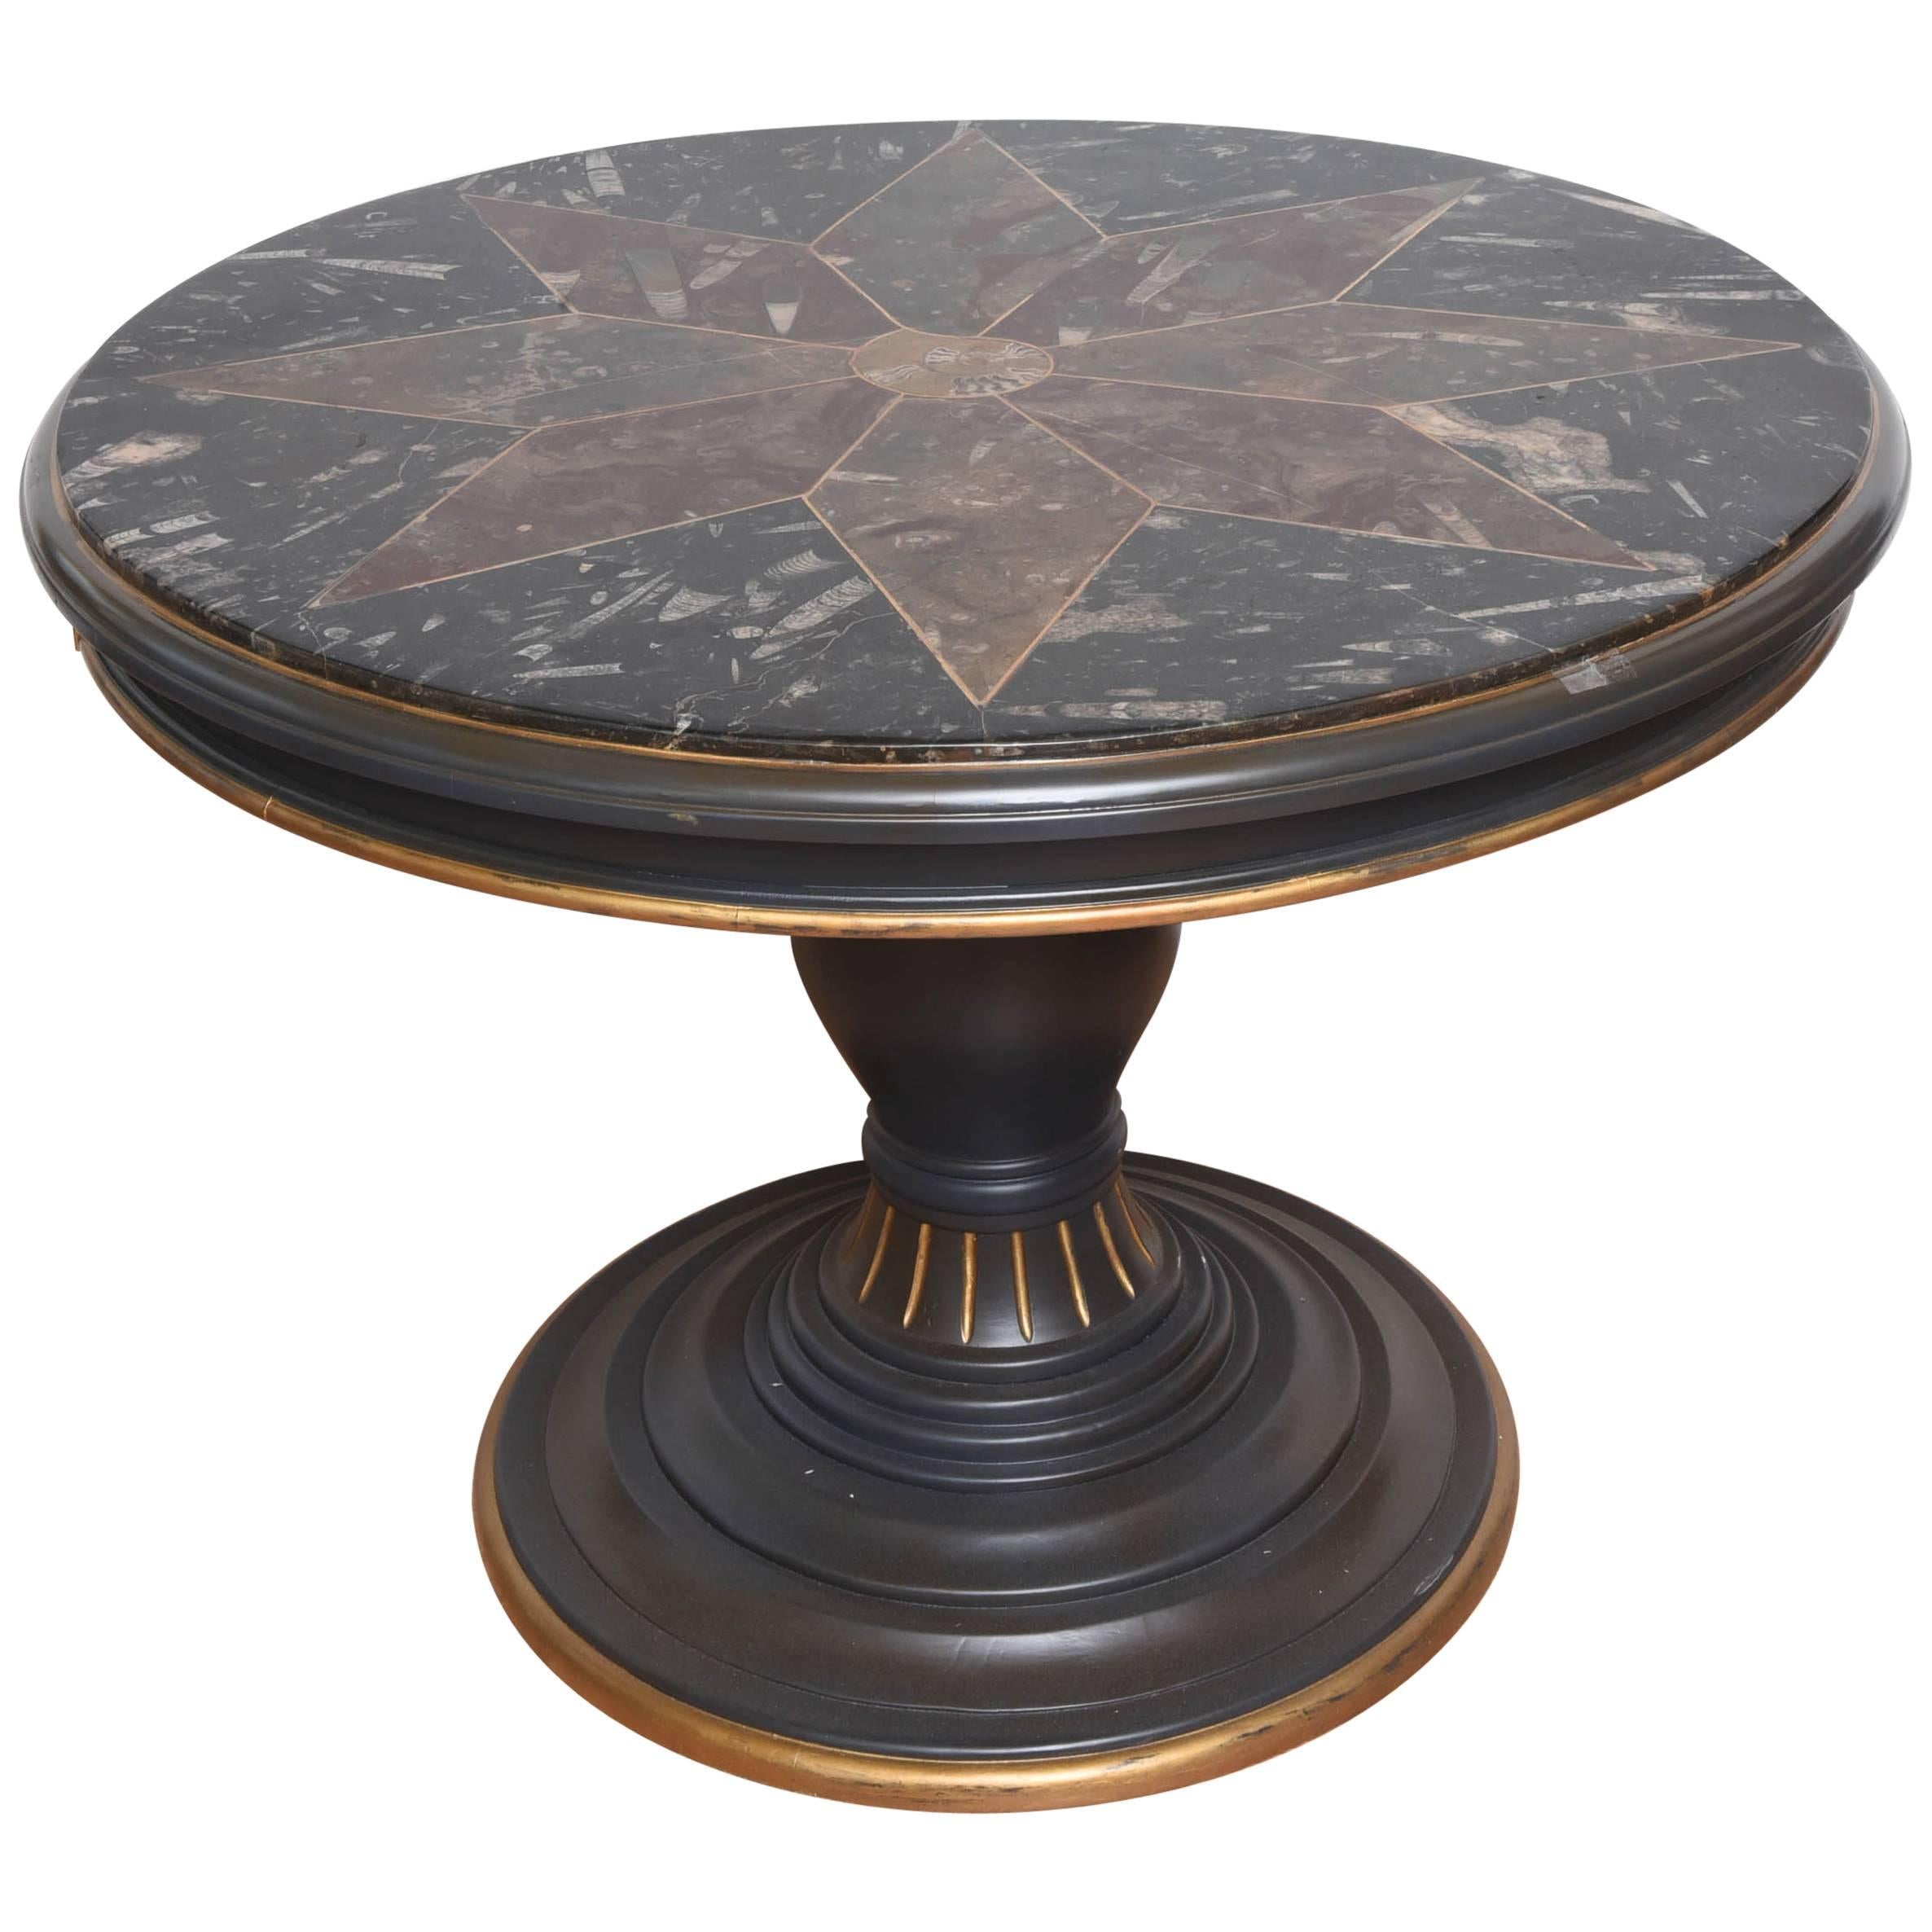 Early 20th Century Specimen Center Table with Fossils Top